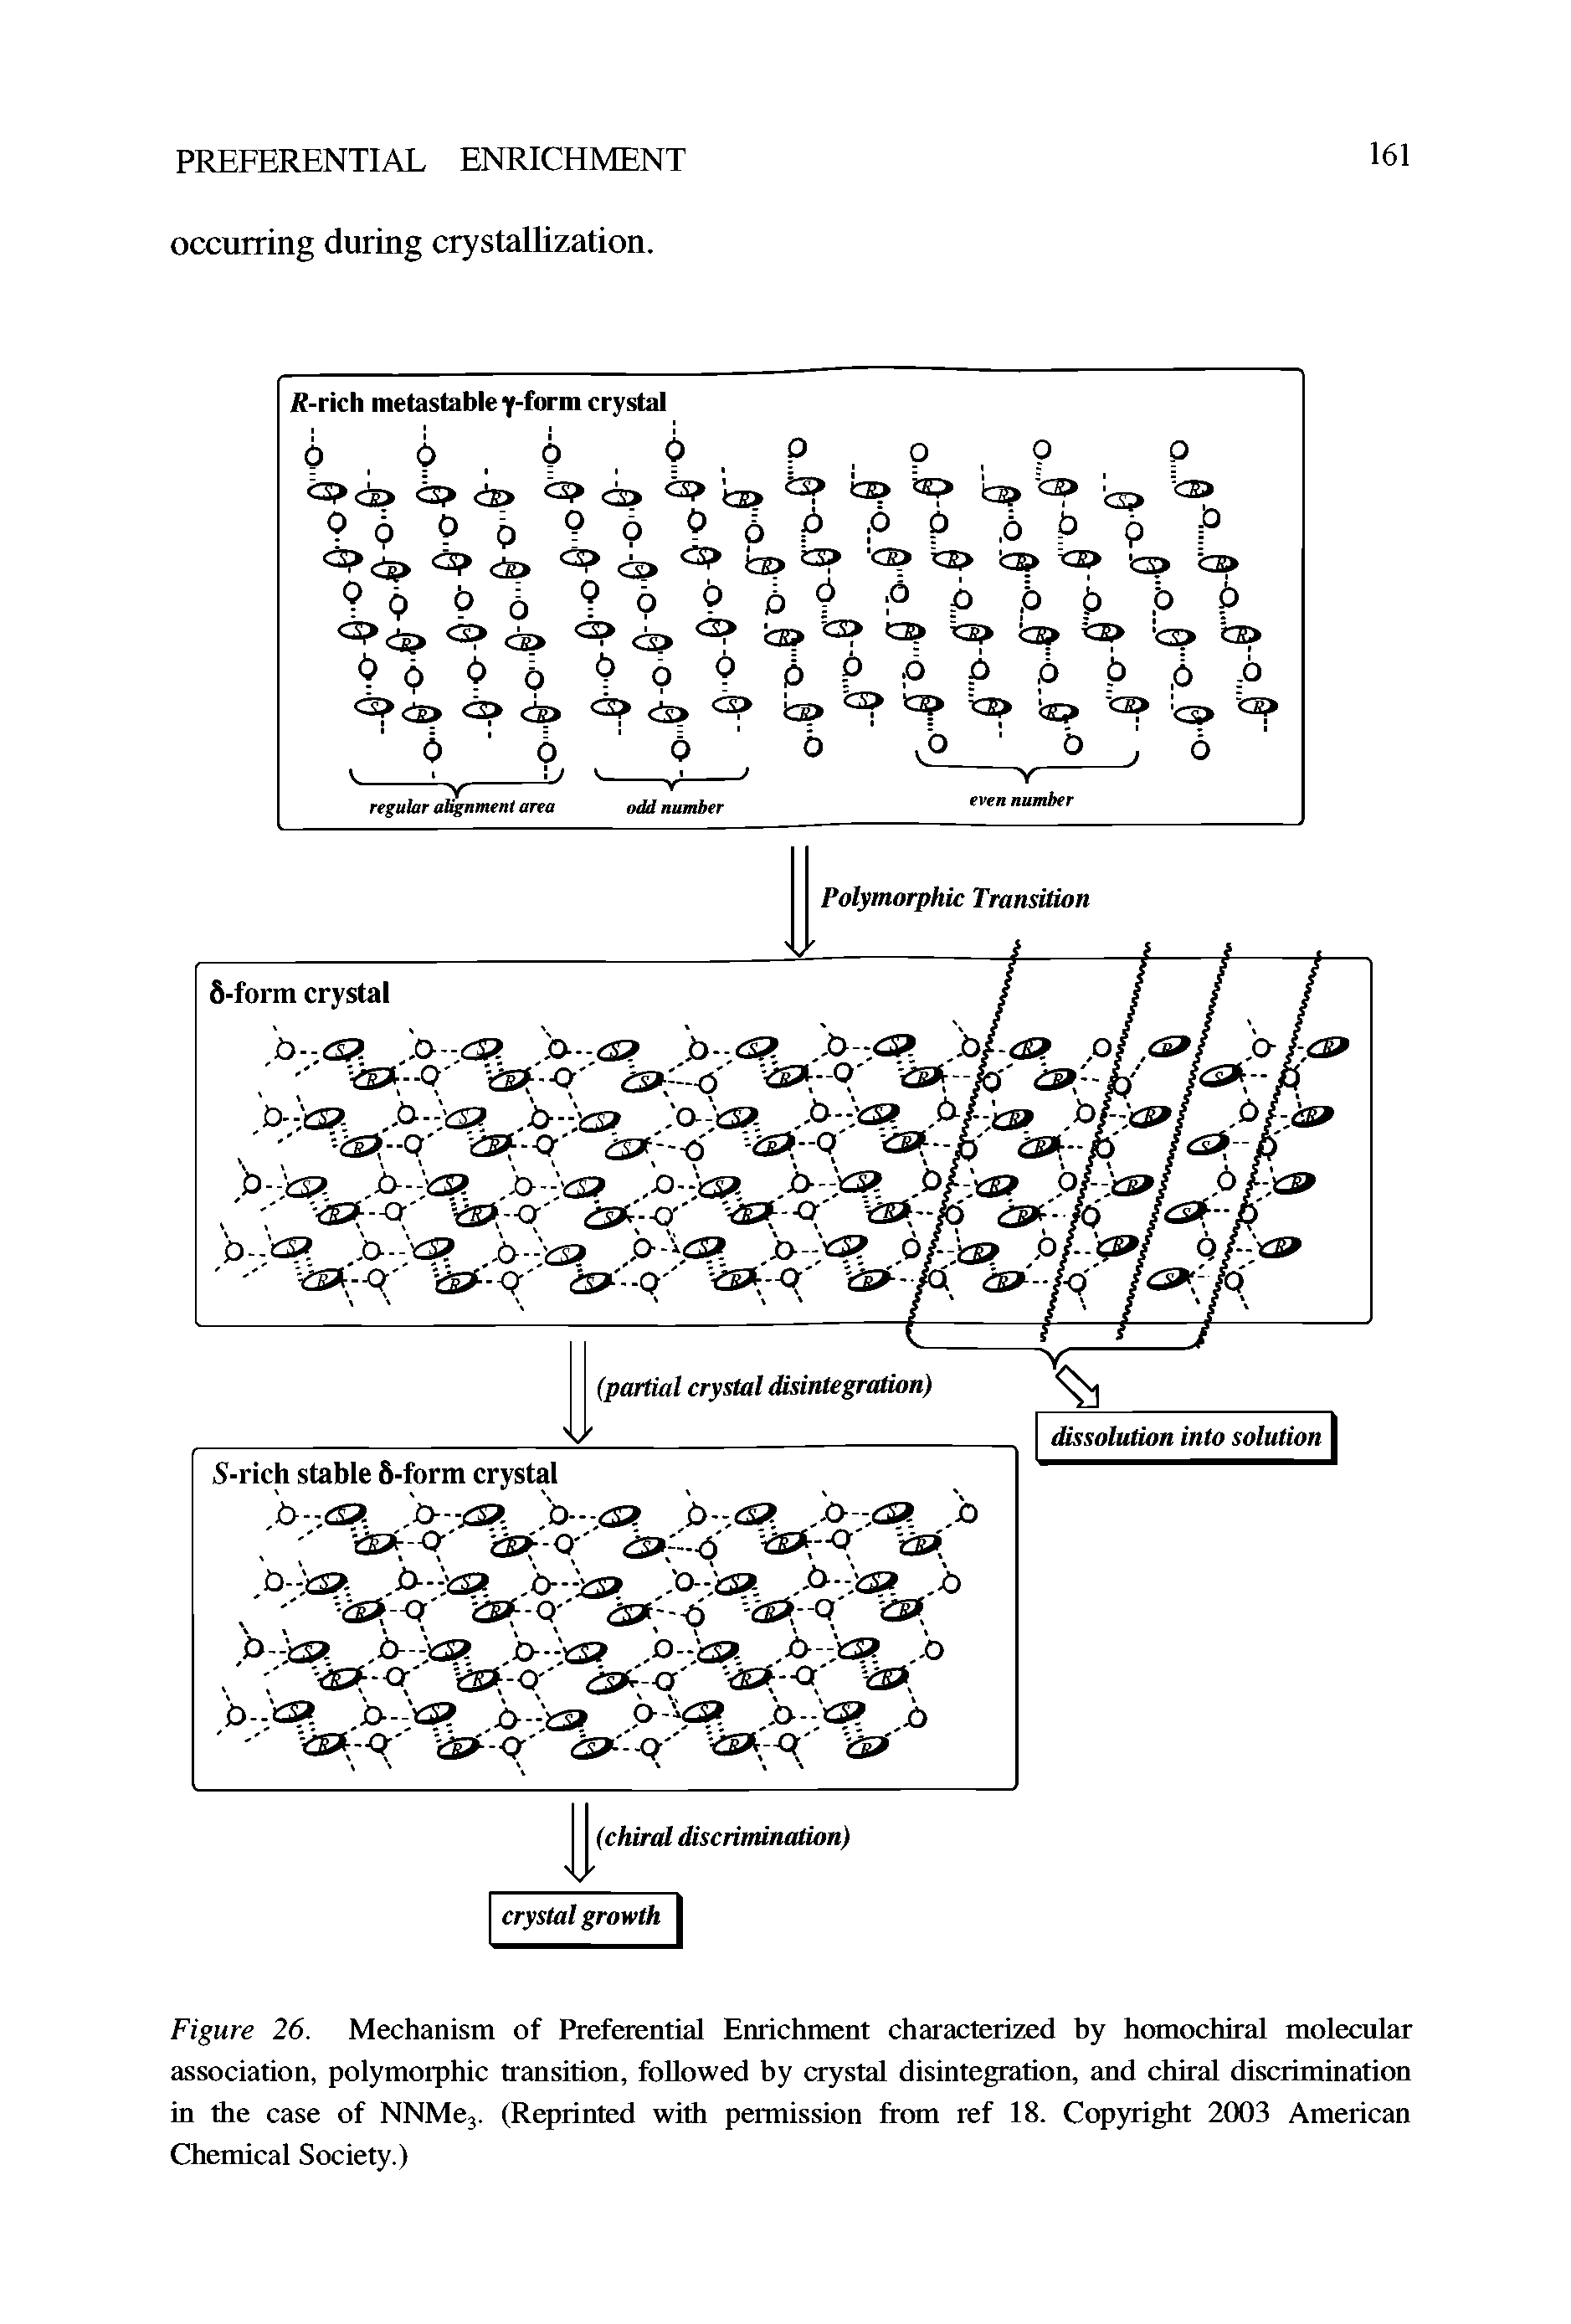 Figure 26. Mechanism of Preferential Enrichment characterized by homochiral molecular association, polymorphic transition, followed by crystal disintegration, and chiral discrimination in the case of NNMe,. (Reprinted with permission from ref 18. Copyright 2003 American Chemical Society.)...